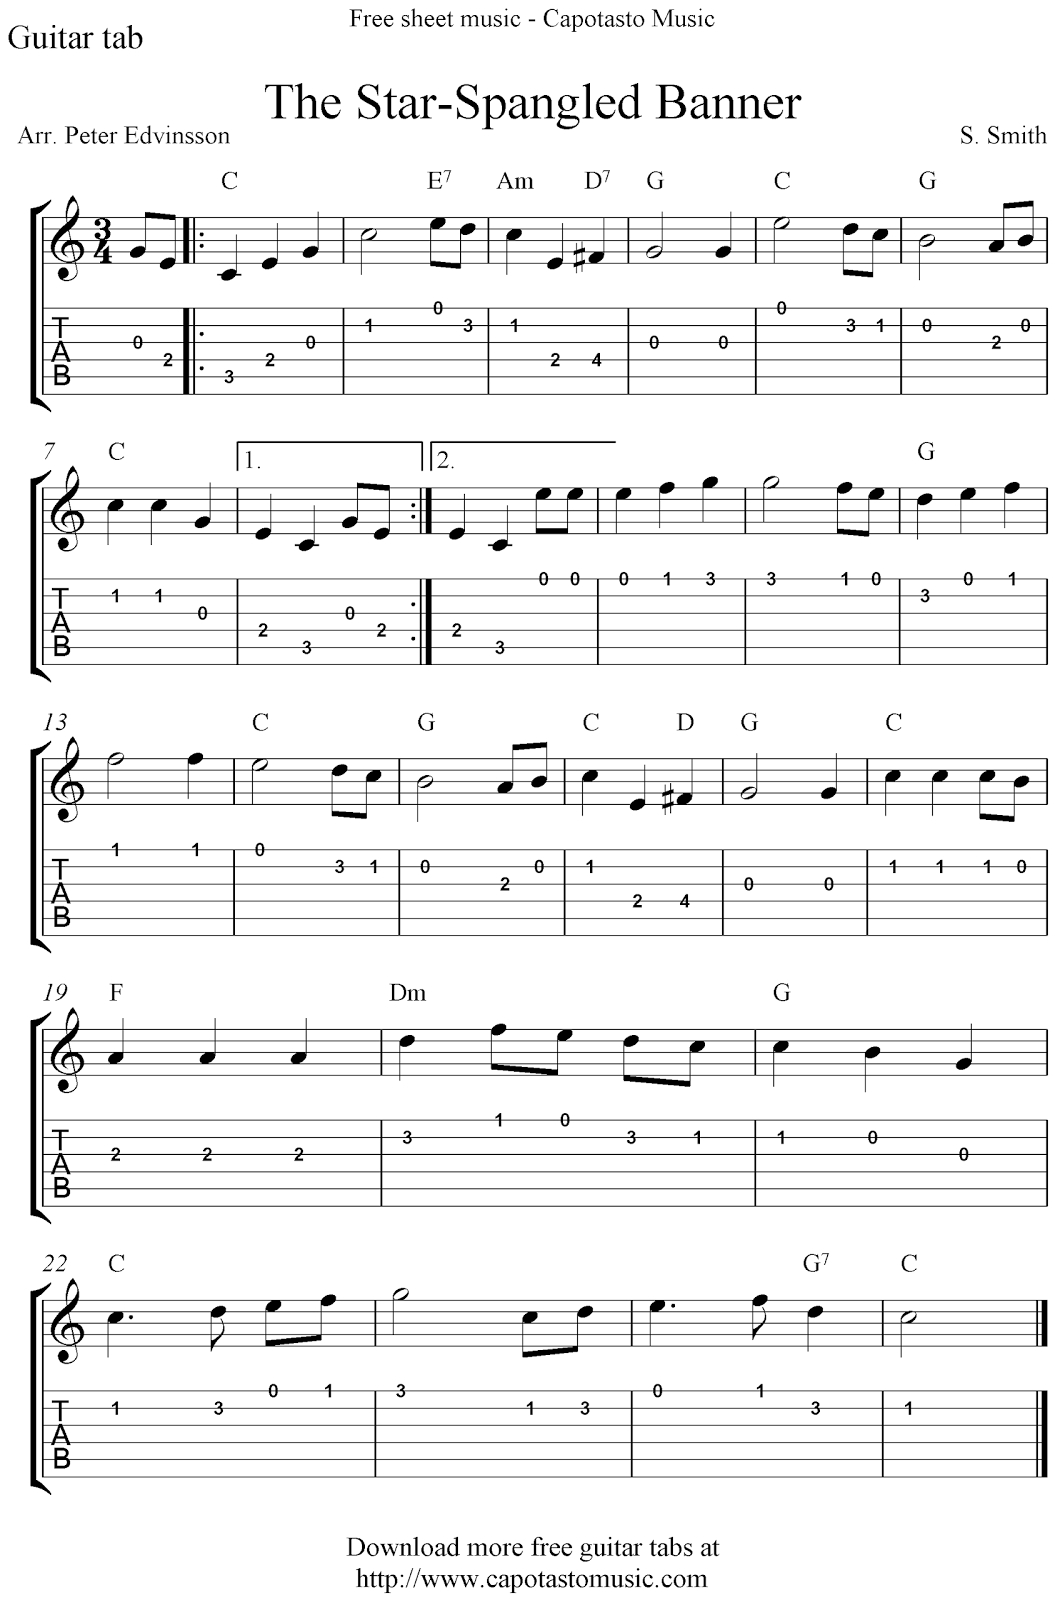 Free Sheet Music Scores: The Star-Spangled Banner, Free Guitar - Free Guitar Sheet Music For Popular Songs Printable